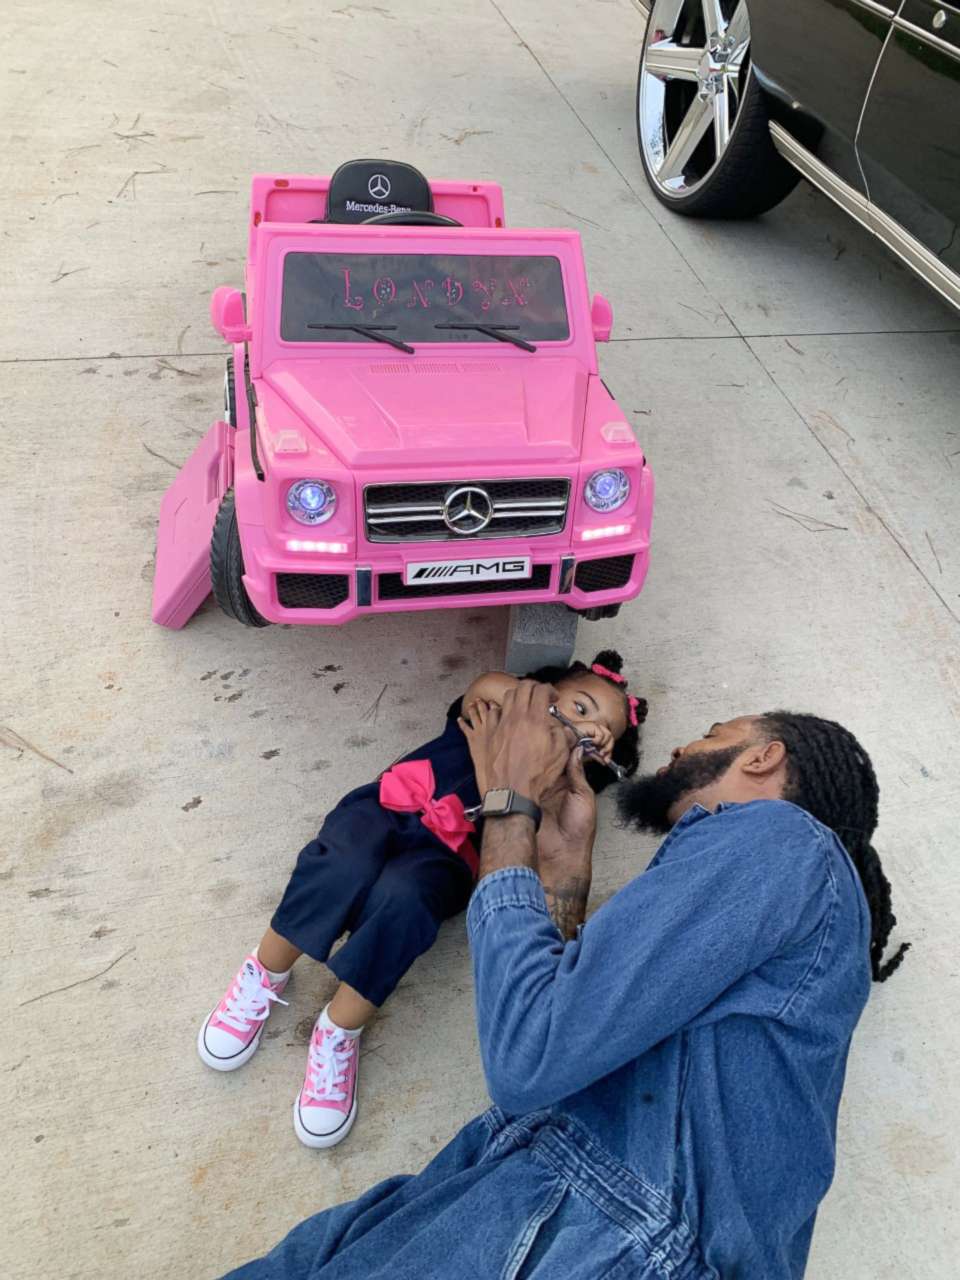 PHOTO: Devante Bennett-Dotson of Anderson, S.C., poses with his daughter, Londyn Bennett-Dotson, 2, in honor of their birthdays, which are one day apart.